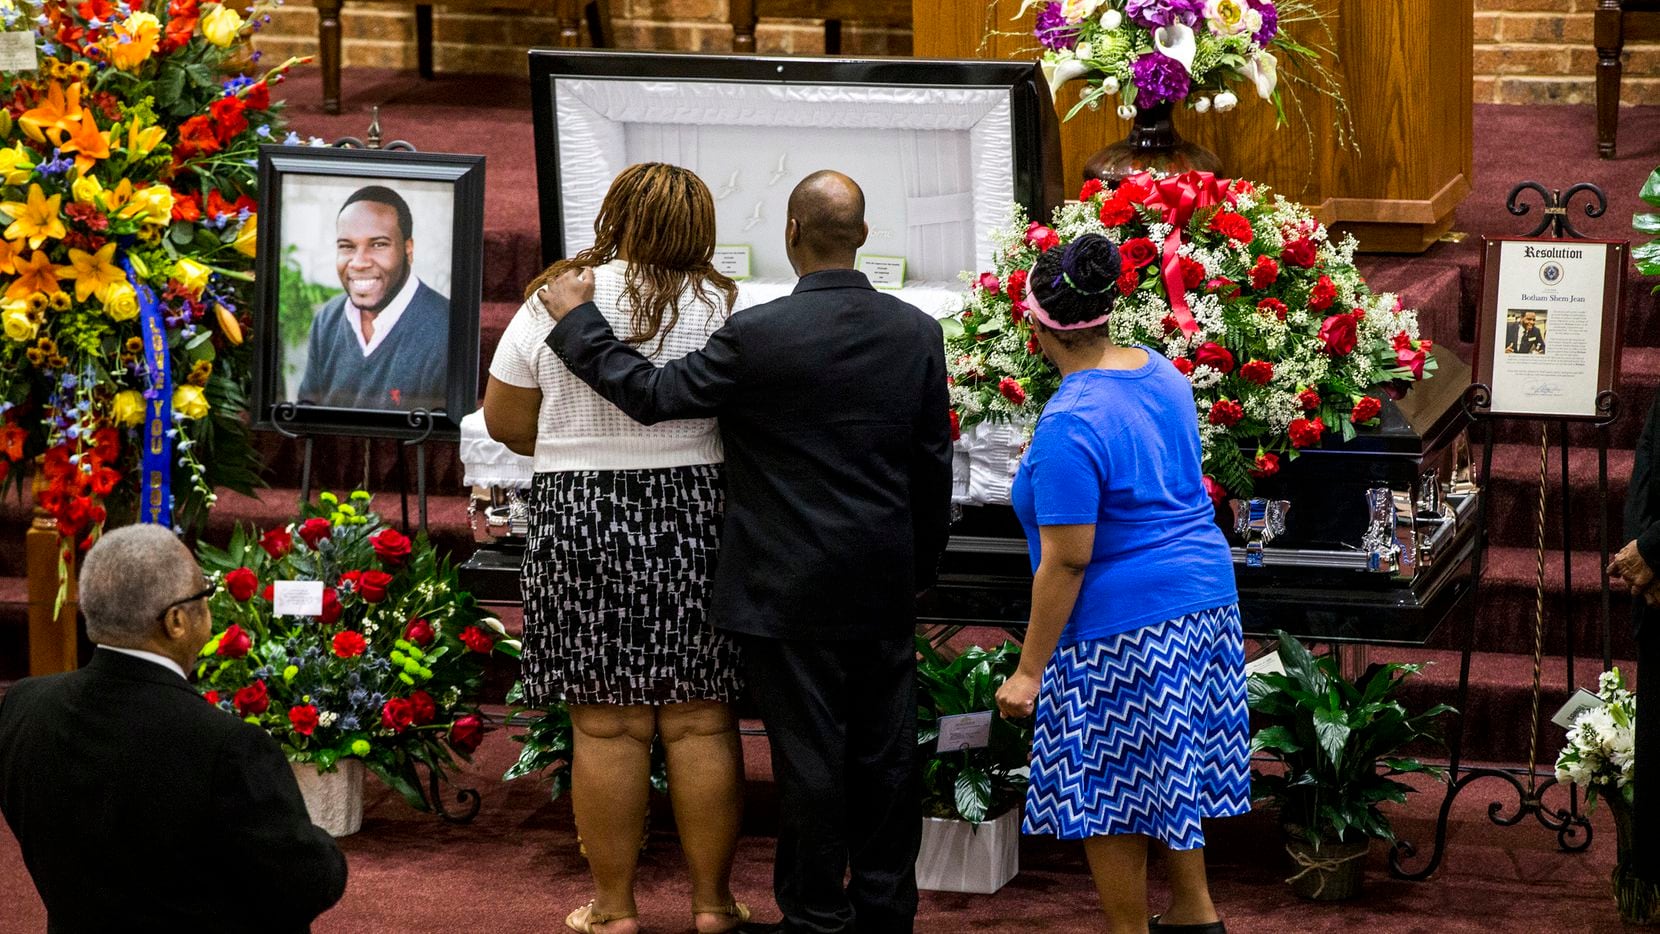 Mourners console each other during the public viewing before the funeral of Botham Shem Jean at the Greenville Avenue Church of Christ on Sept. 13, 2018 in Richardson. He was shot and killed by a Dallas police officer in his apartment in Dallas.